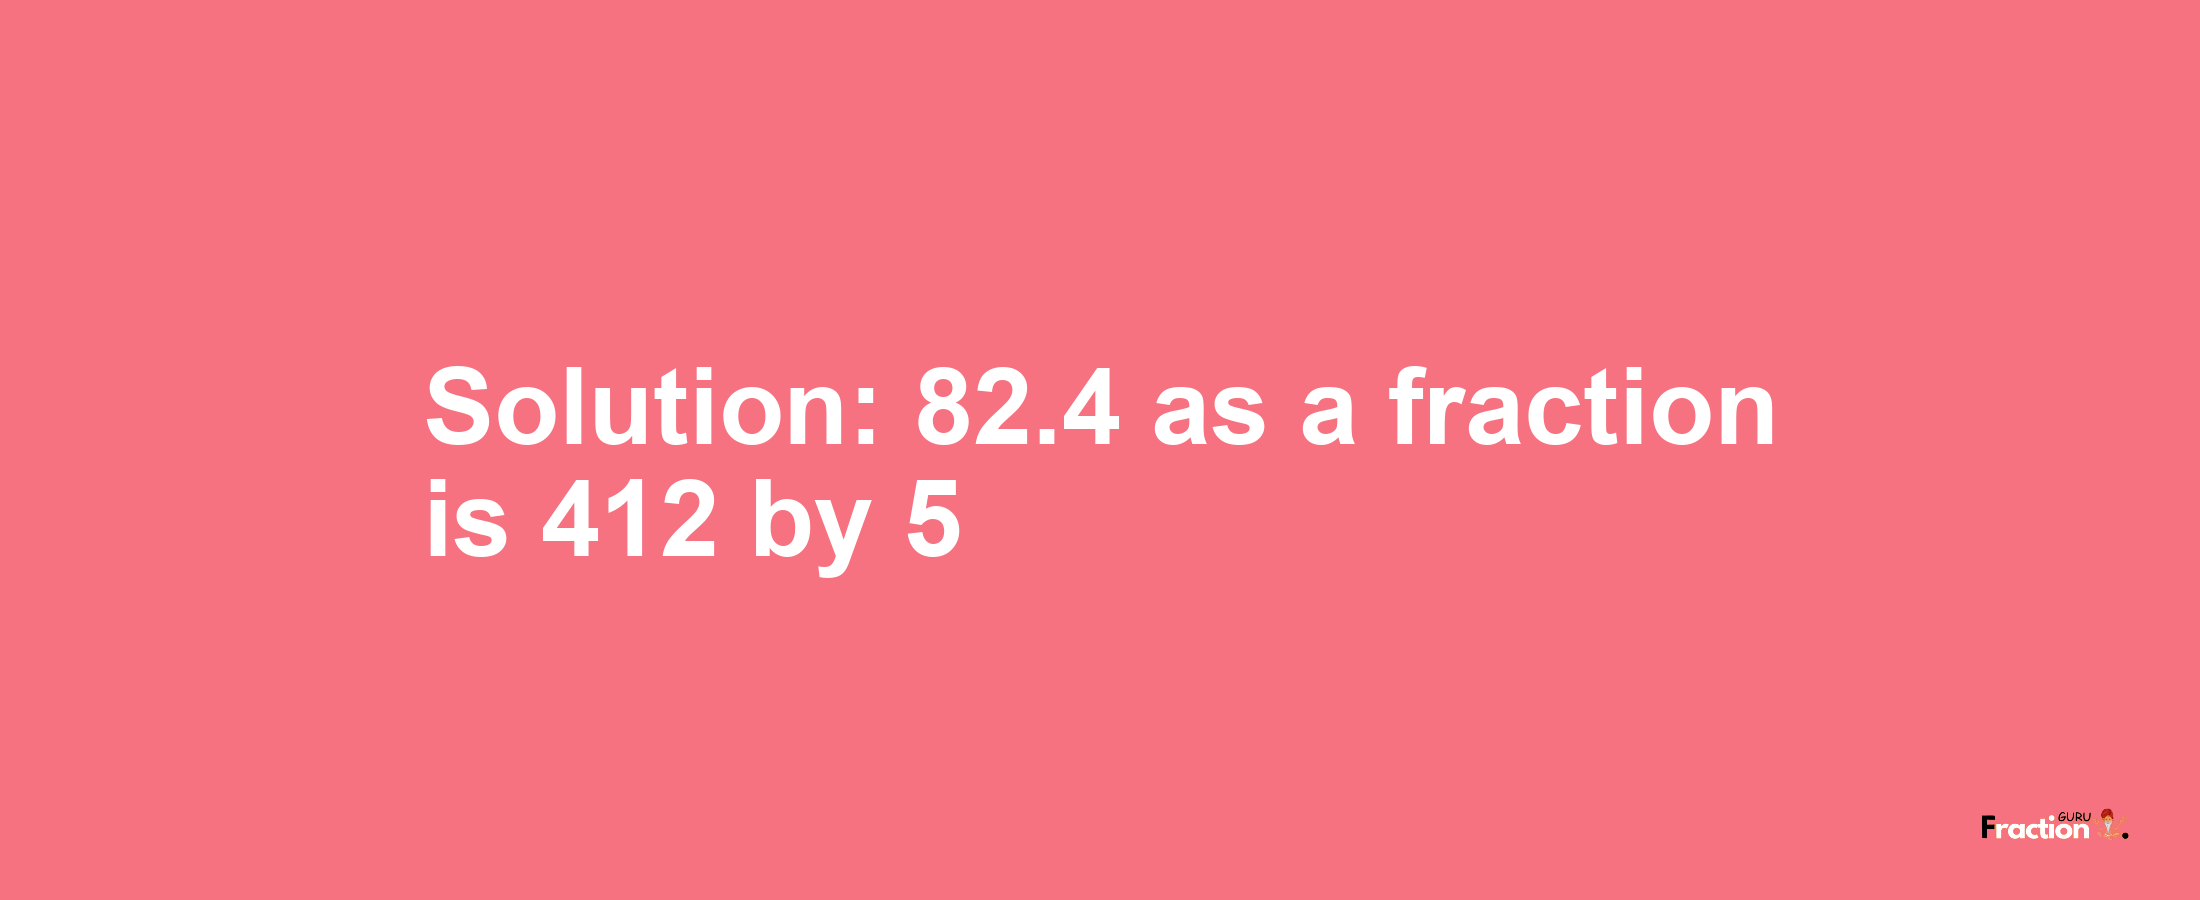 Solution:82.4 as a fraction is 412/5